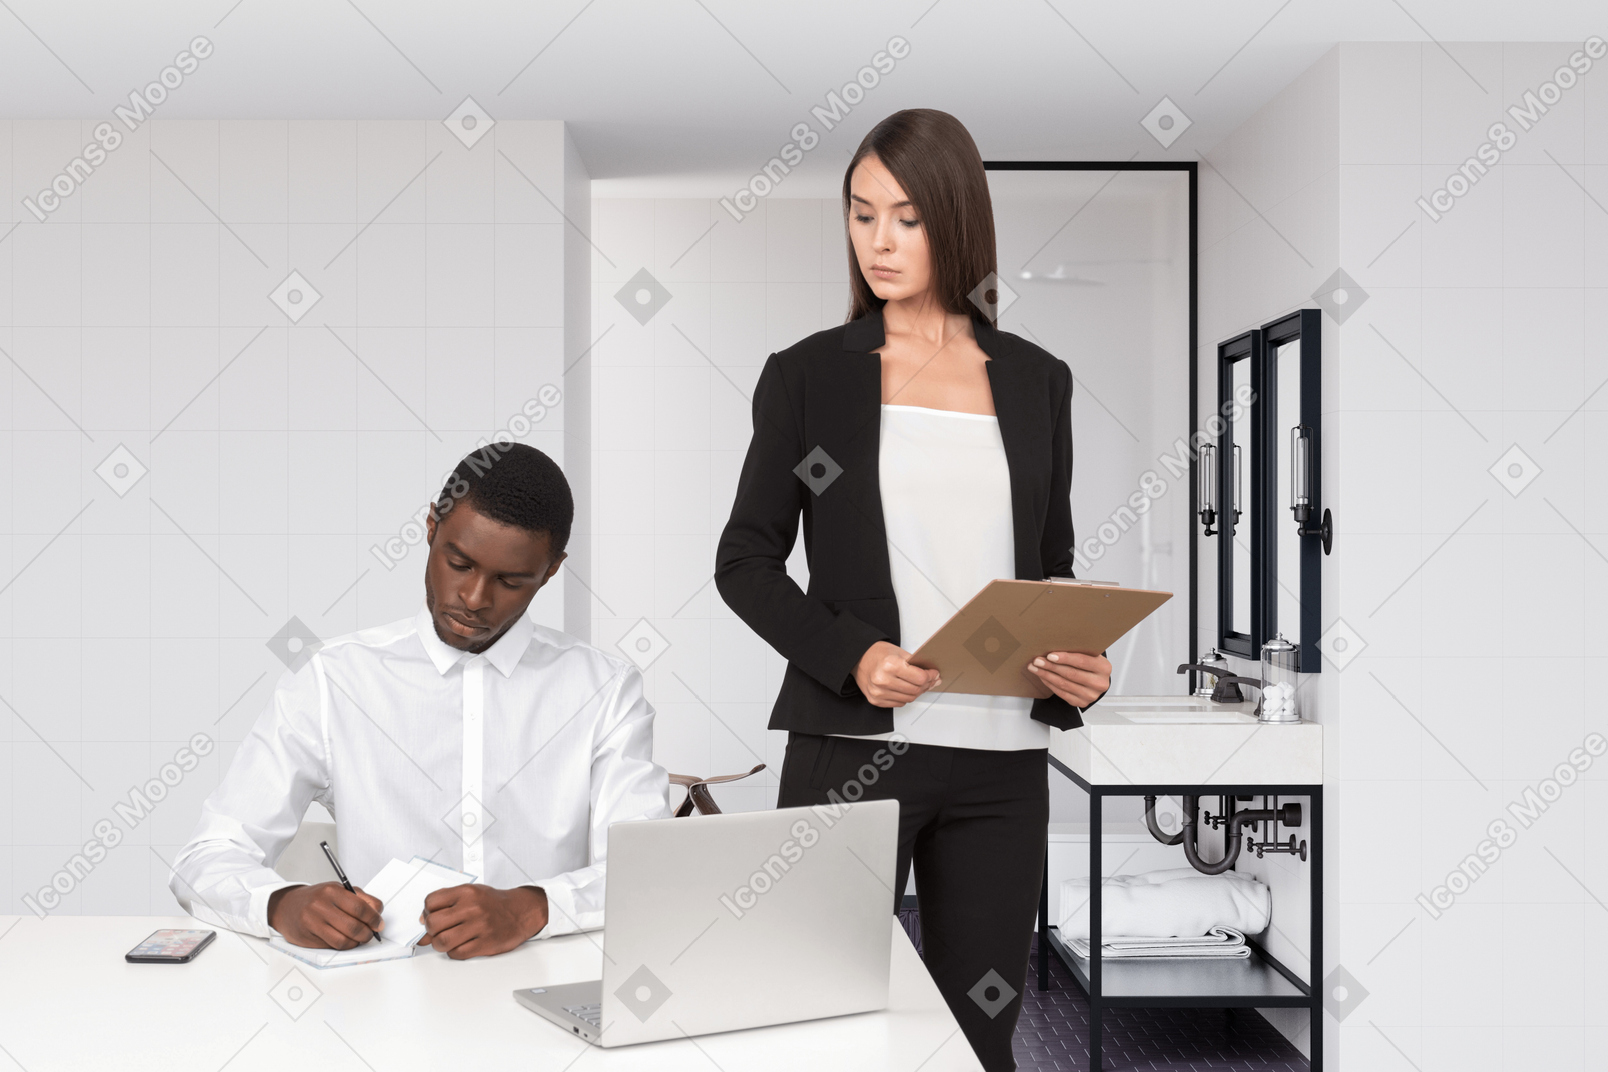 Man and woman working in the bathroom